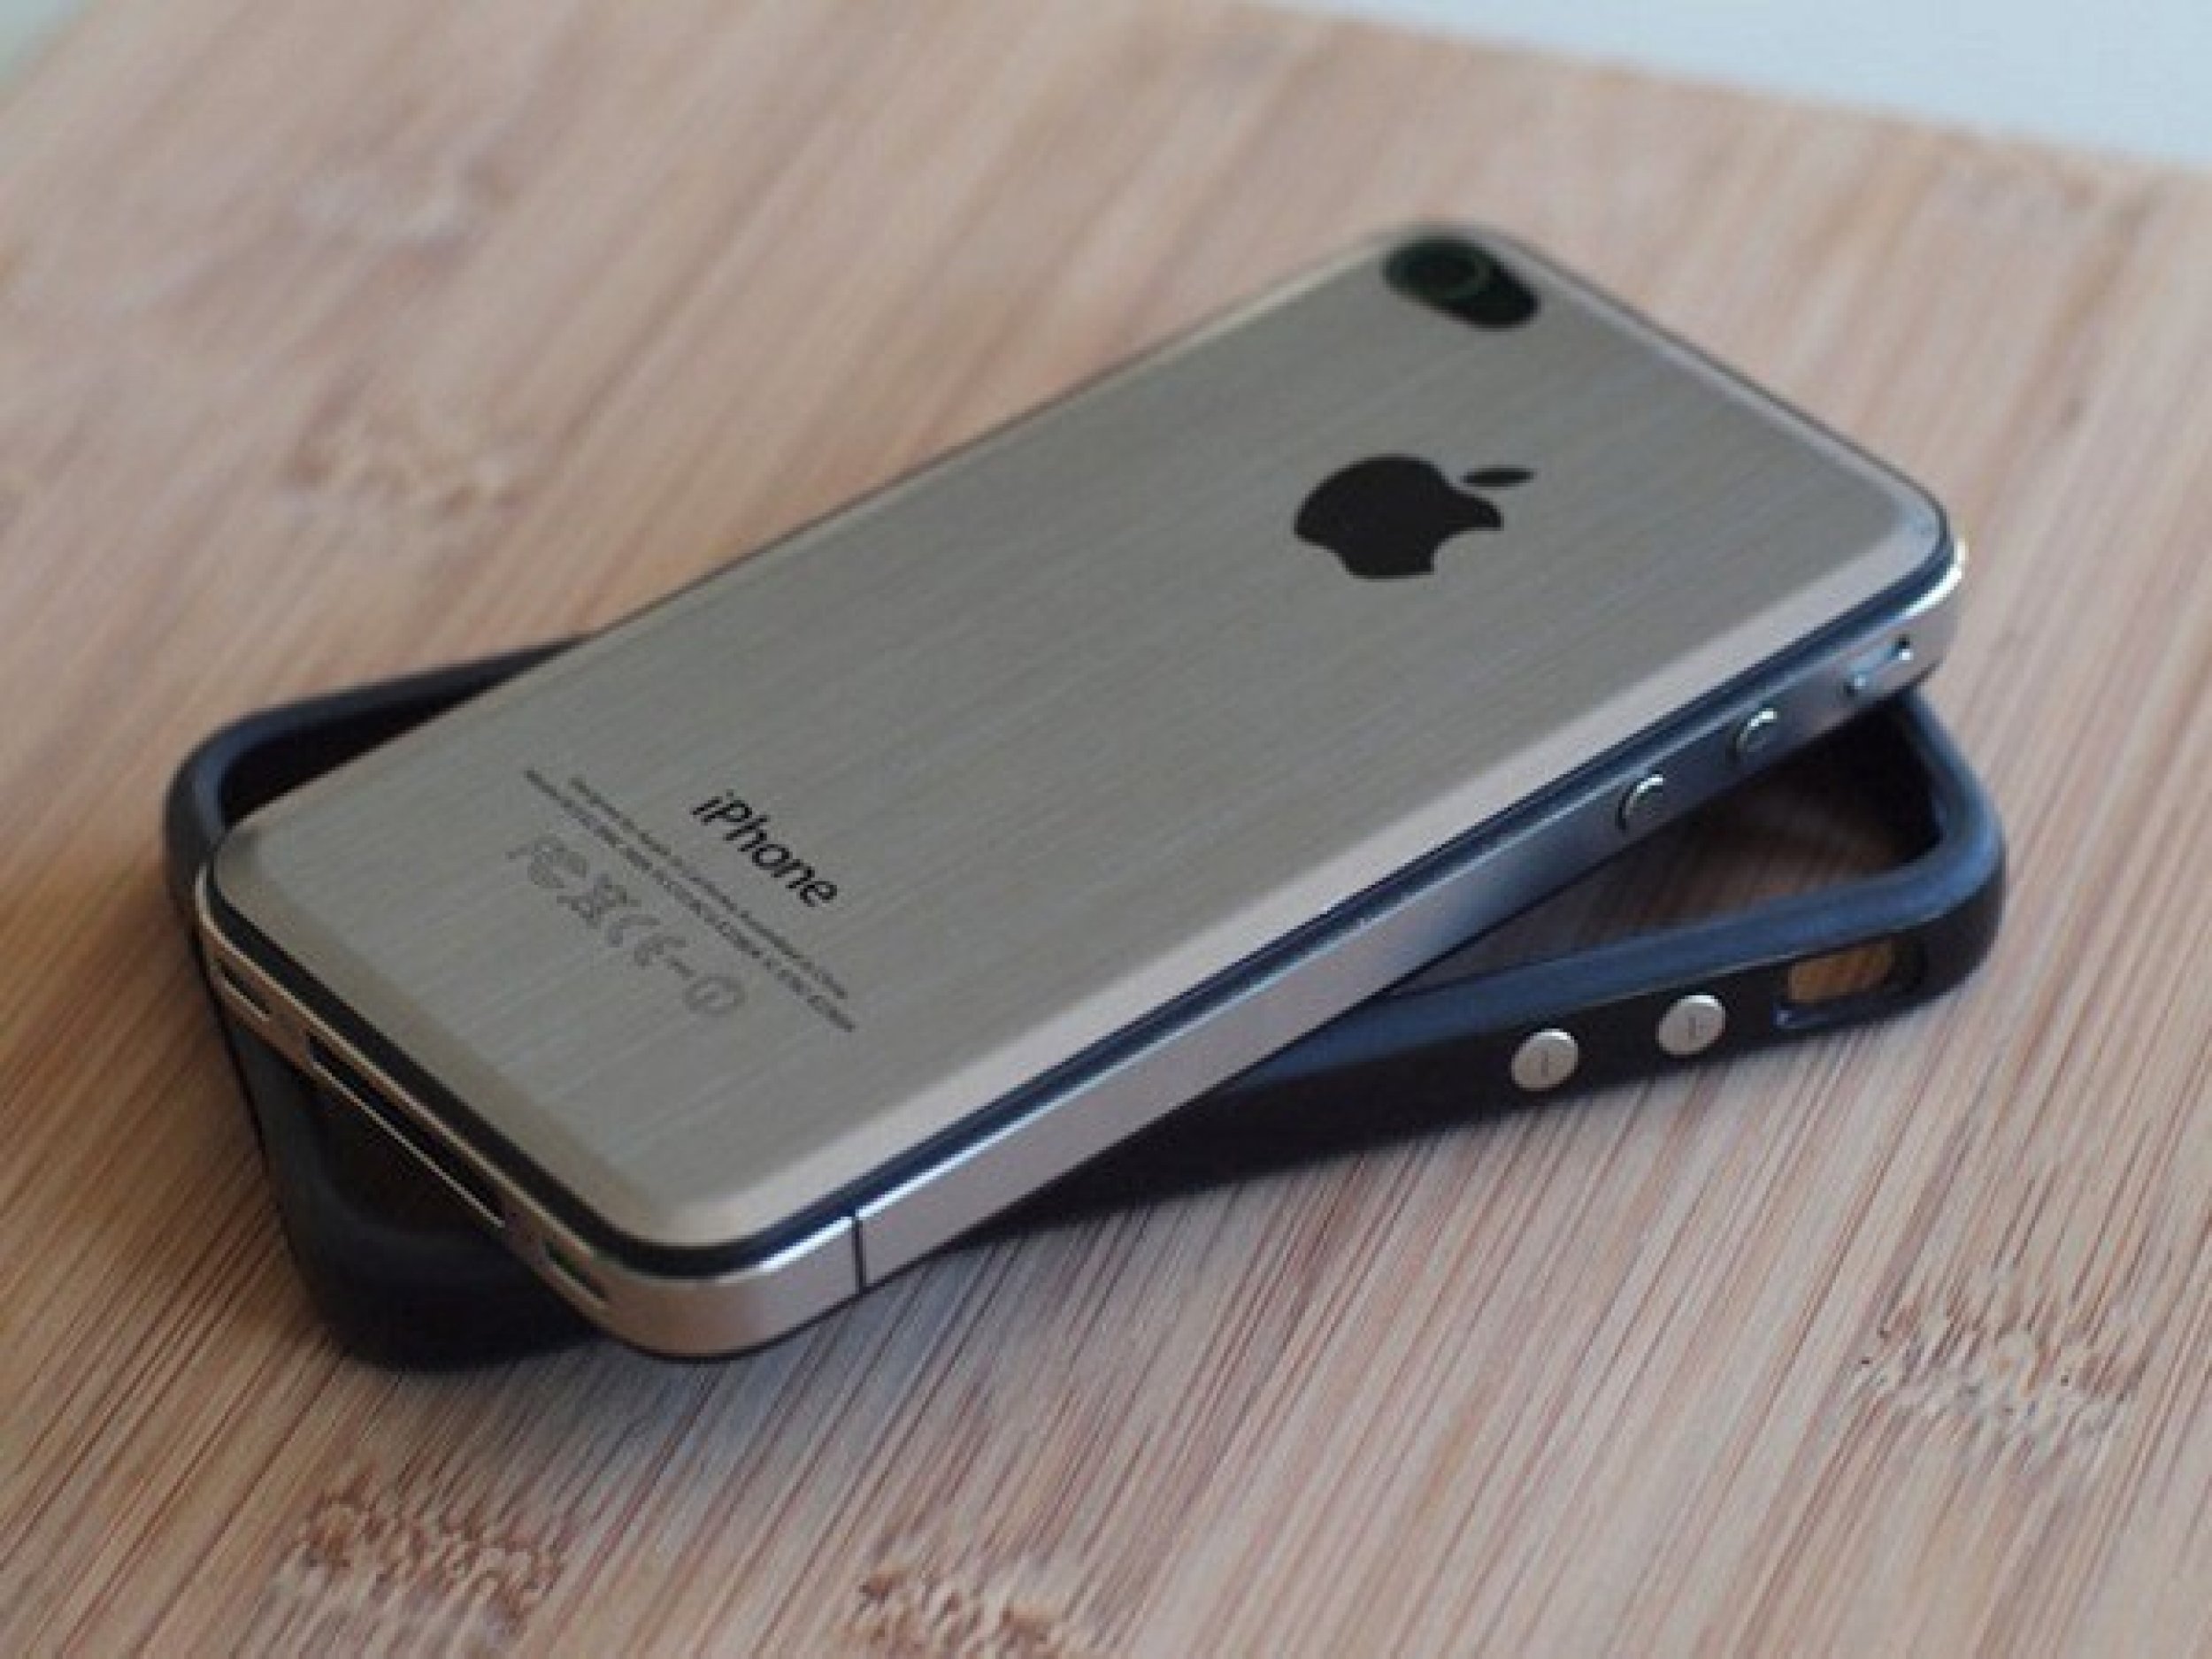 IPhone 5 Release Date 2012 Will Apples Next Smartphone Lose Its Home Button SPECS 